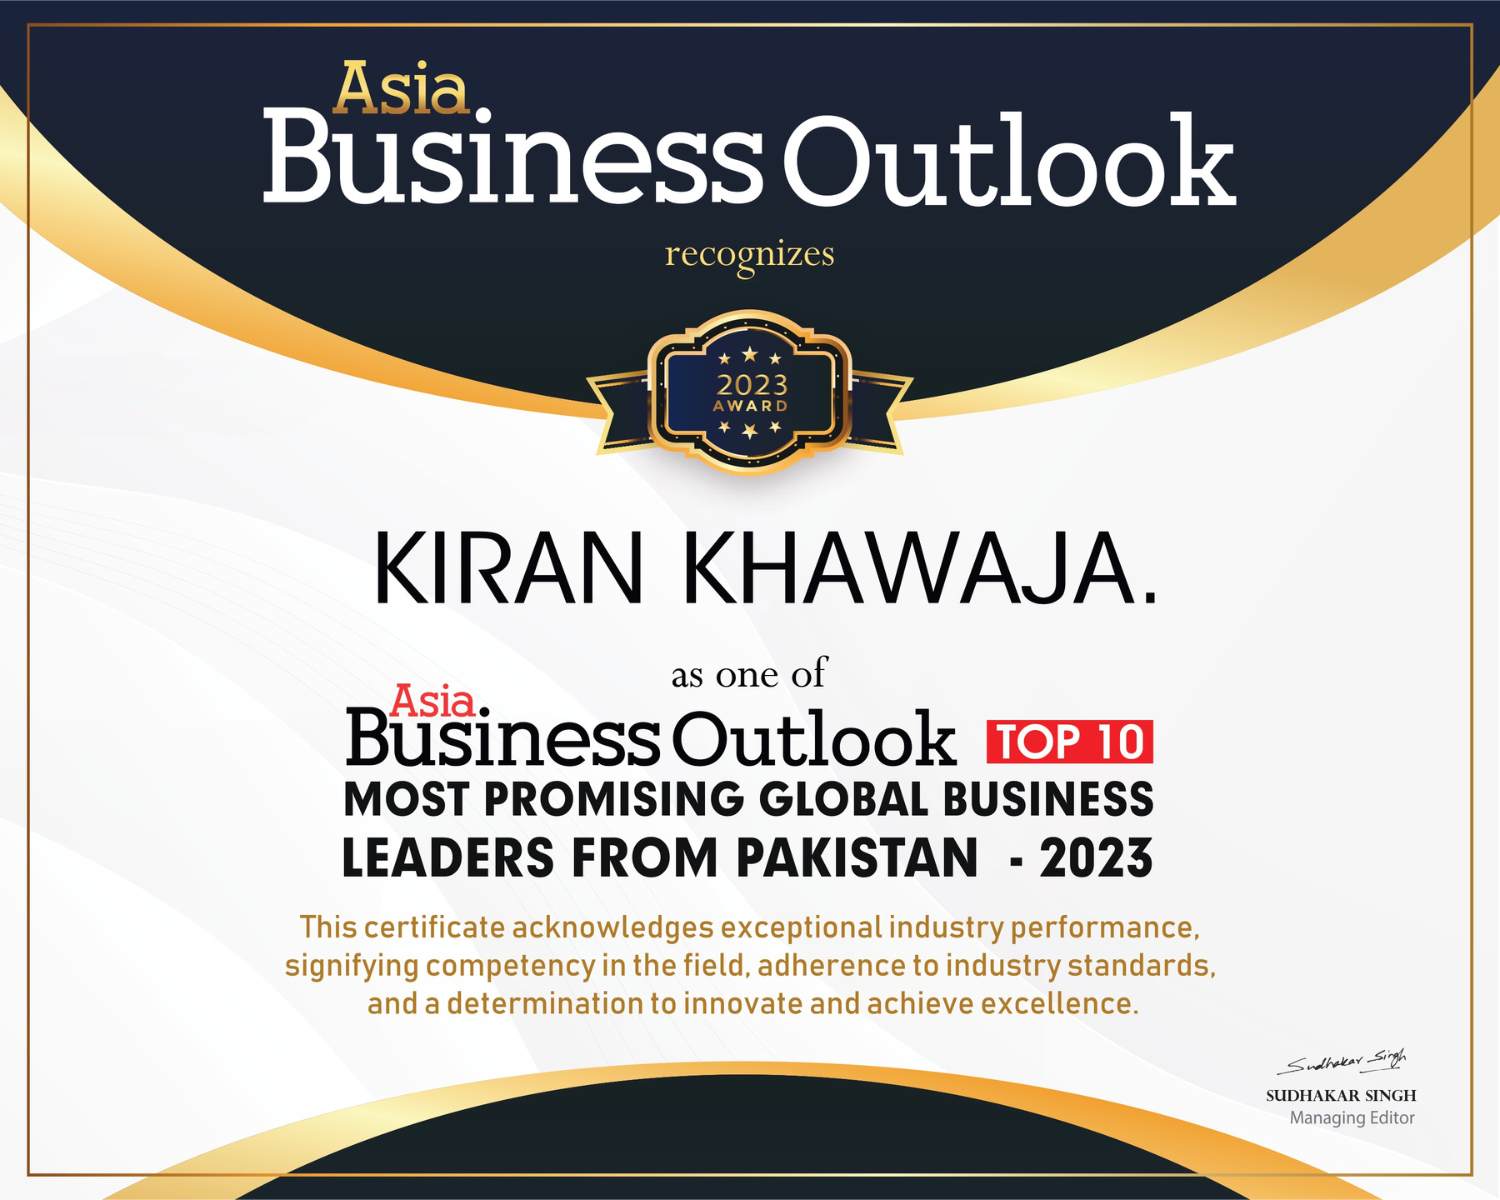 Asia Business Outlook 2023